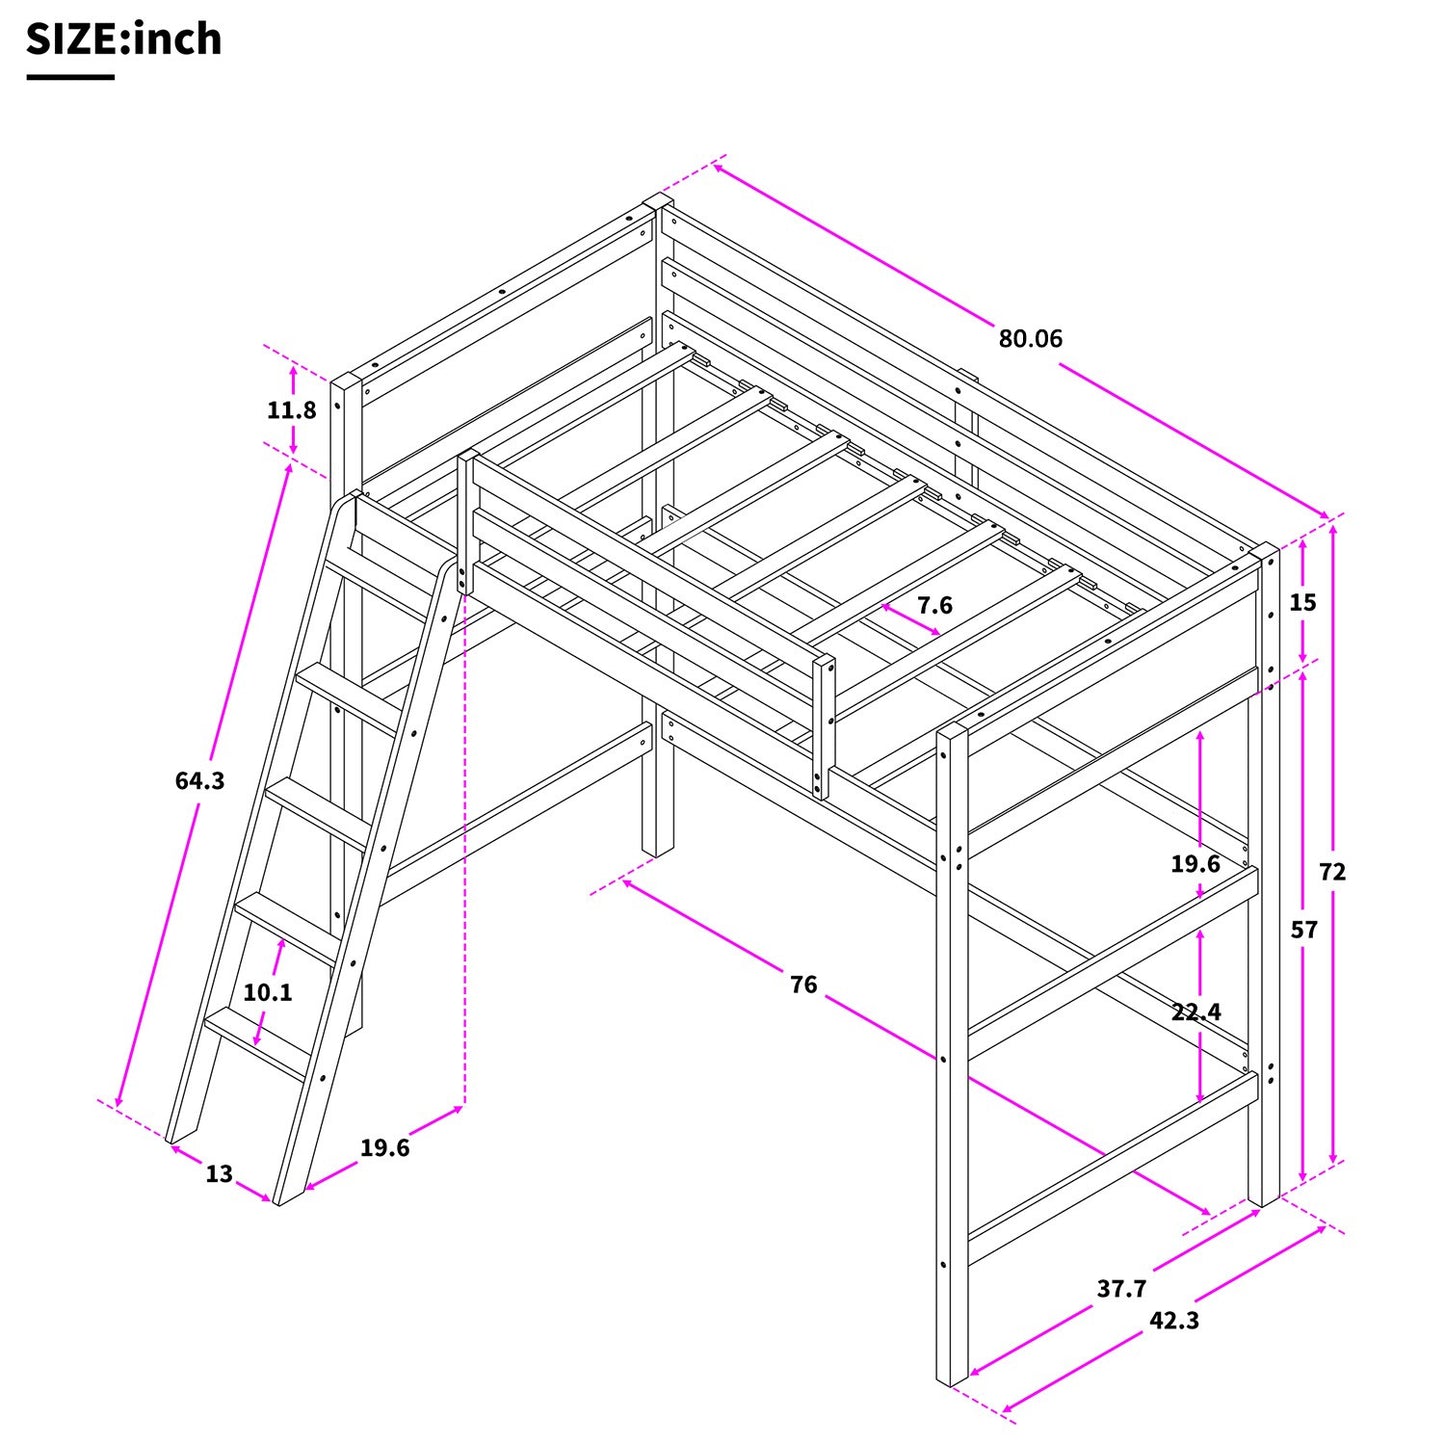 White Twin Size High Loft Bed